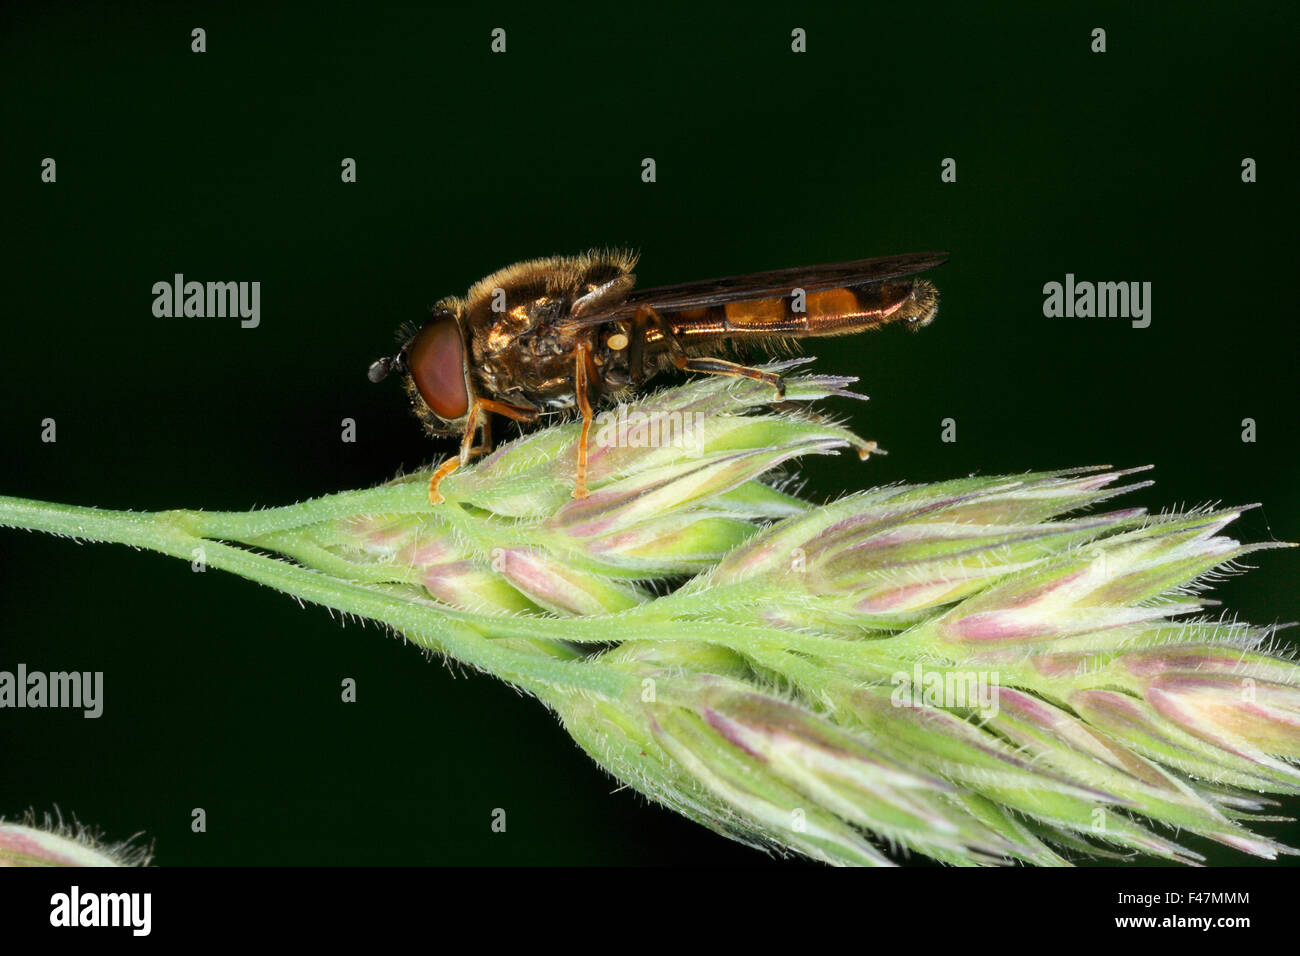 A Platycheirus clypeatus, hoverfly, close-up, Sweden. Stock Photo